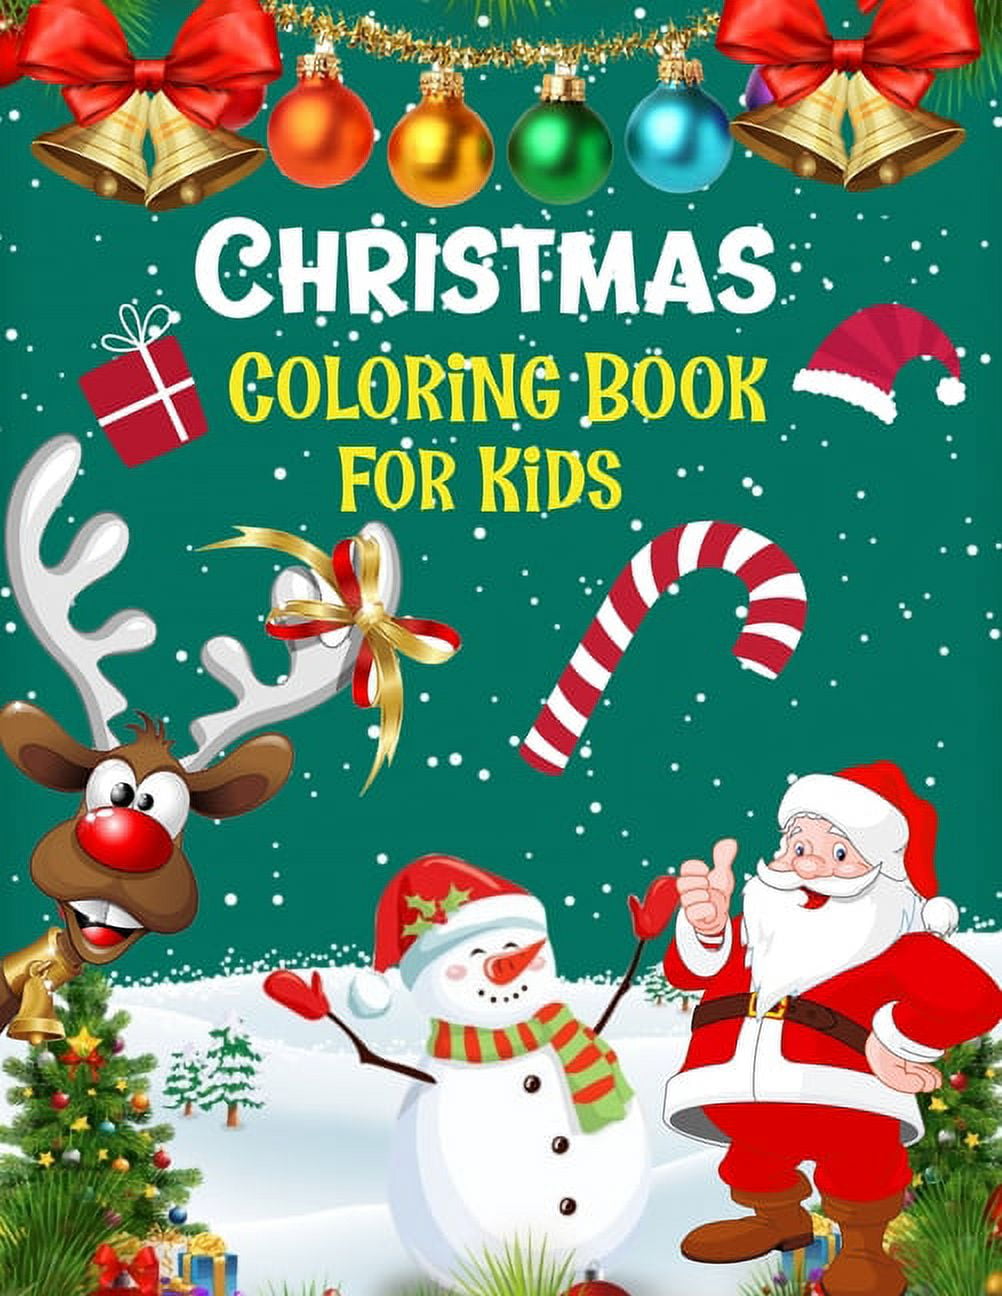 Christmas Coloring Books Bulk Assortment for Kids Toddlers -- 12 Holiday Christmas Activity Books with Stickers, Games, Puzzles, Mazes and More